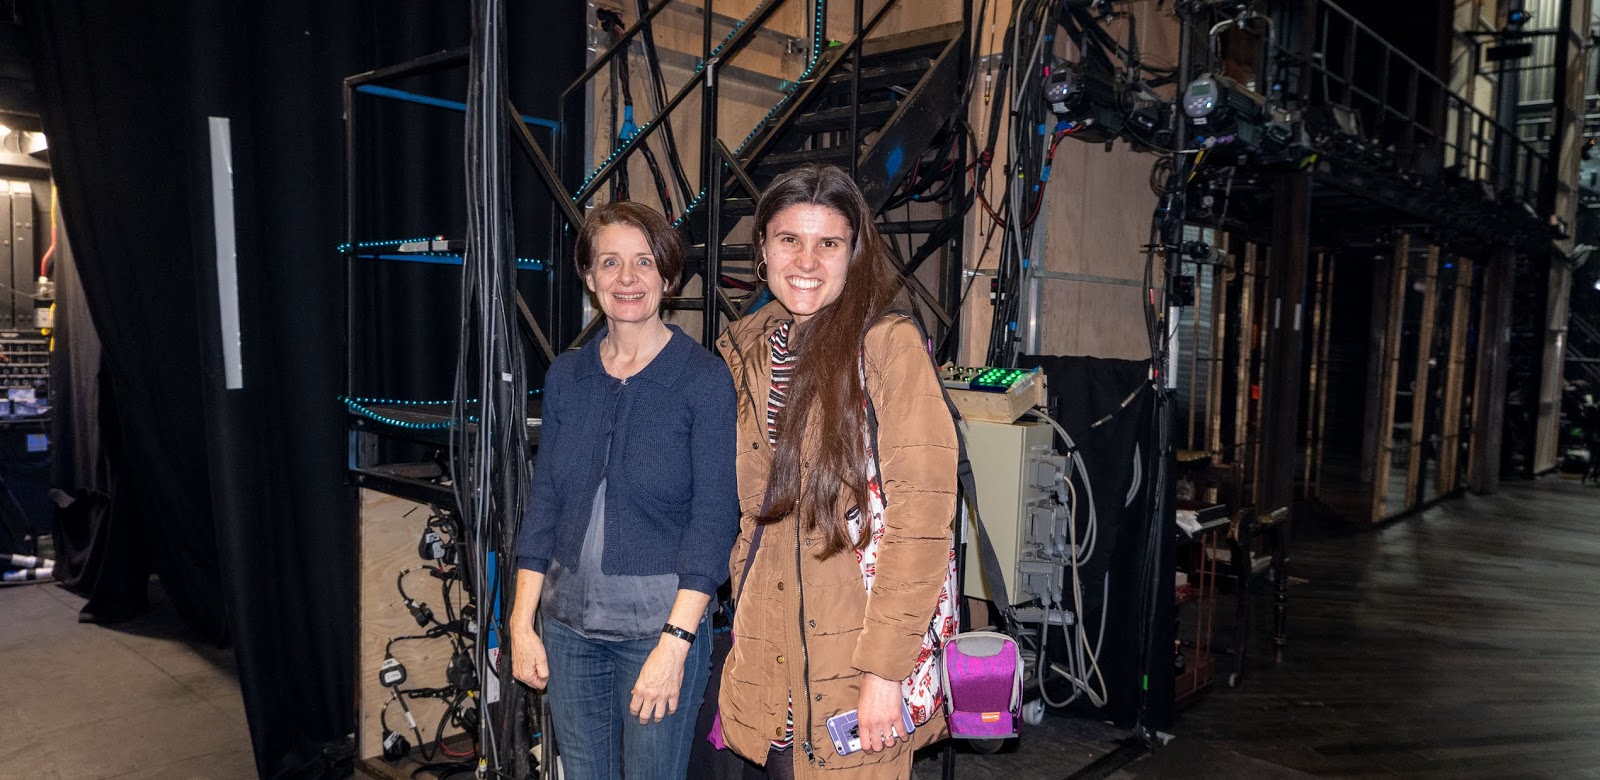 Kat Last and Company Manager Linda Fitzpatrick, backstage at The Marlowe Theatre on Measure For Measure opening night